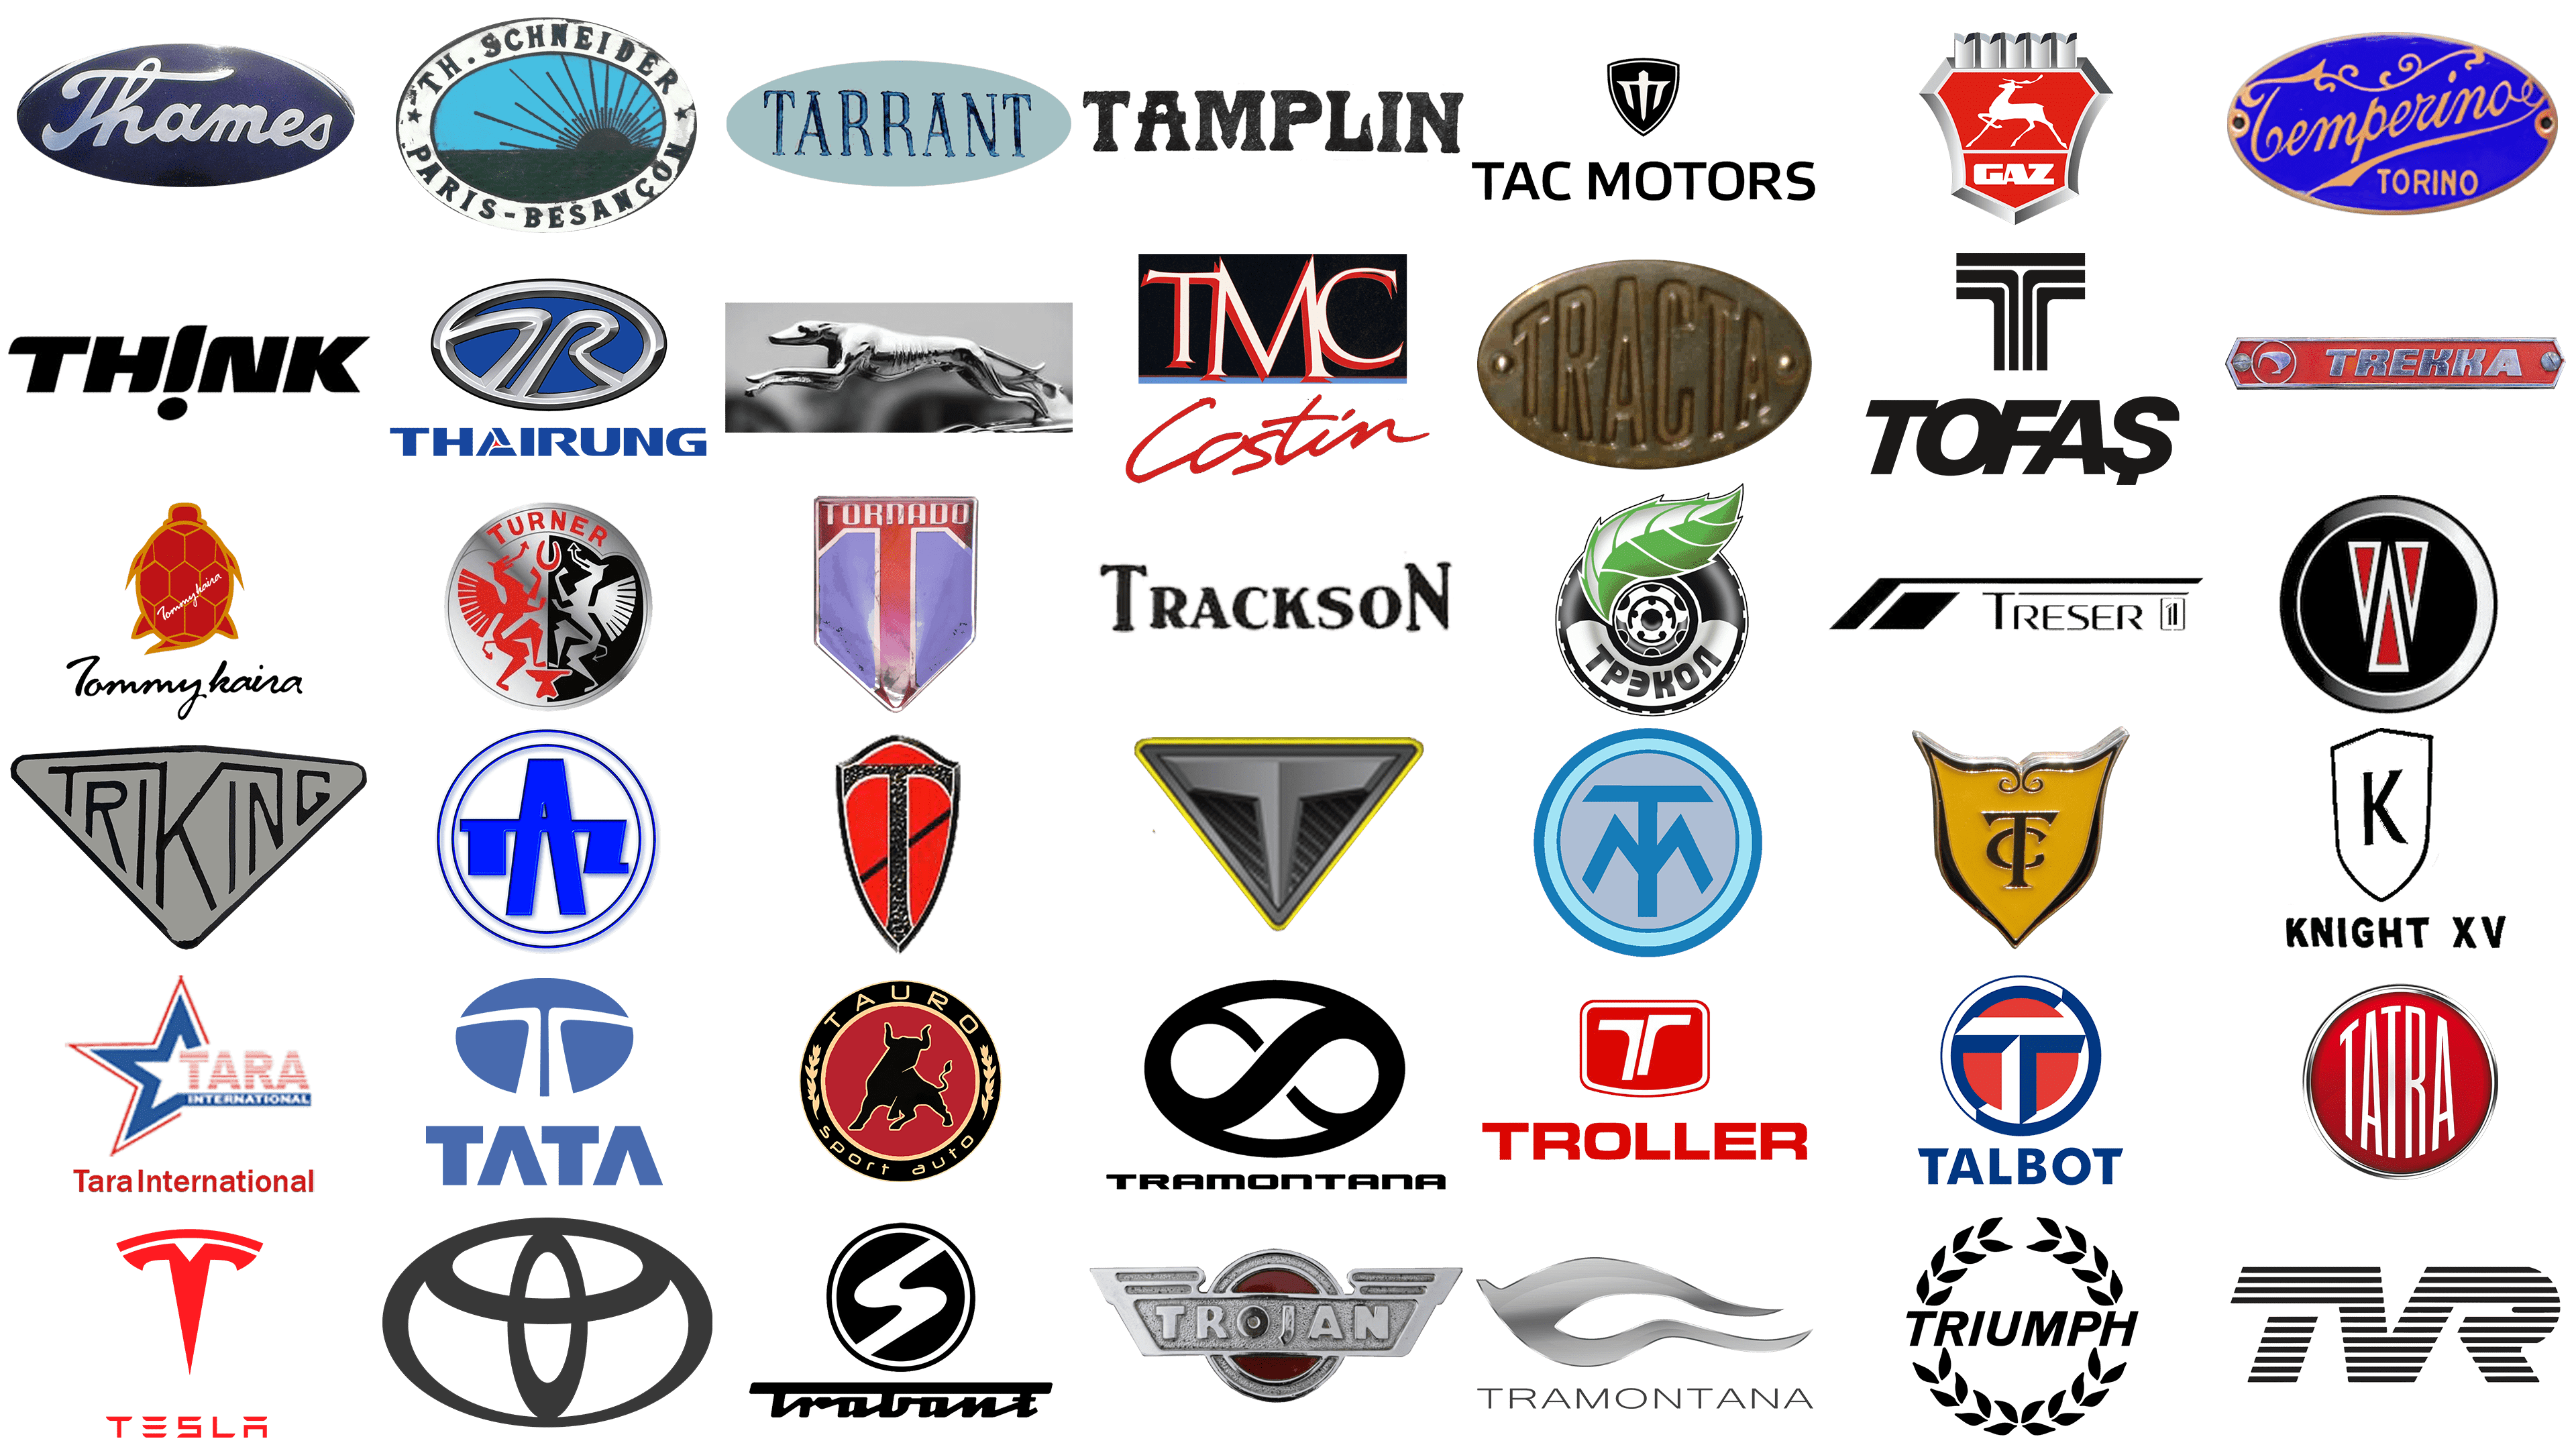 Car brands and logos list and who owns which car brands?